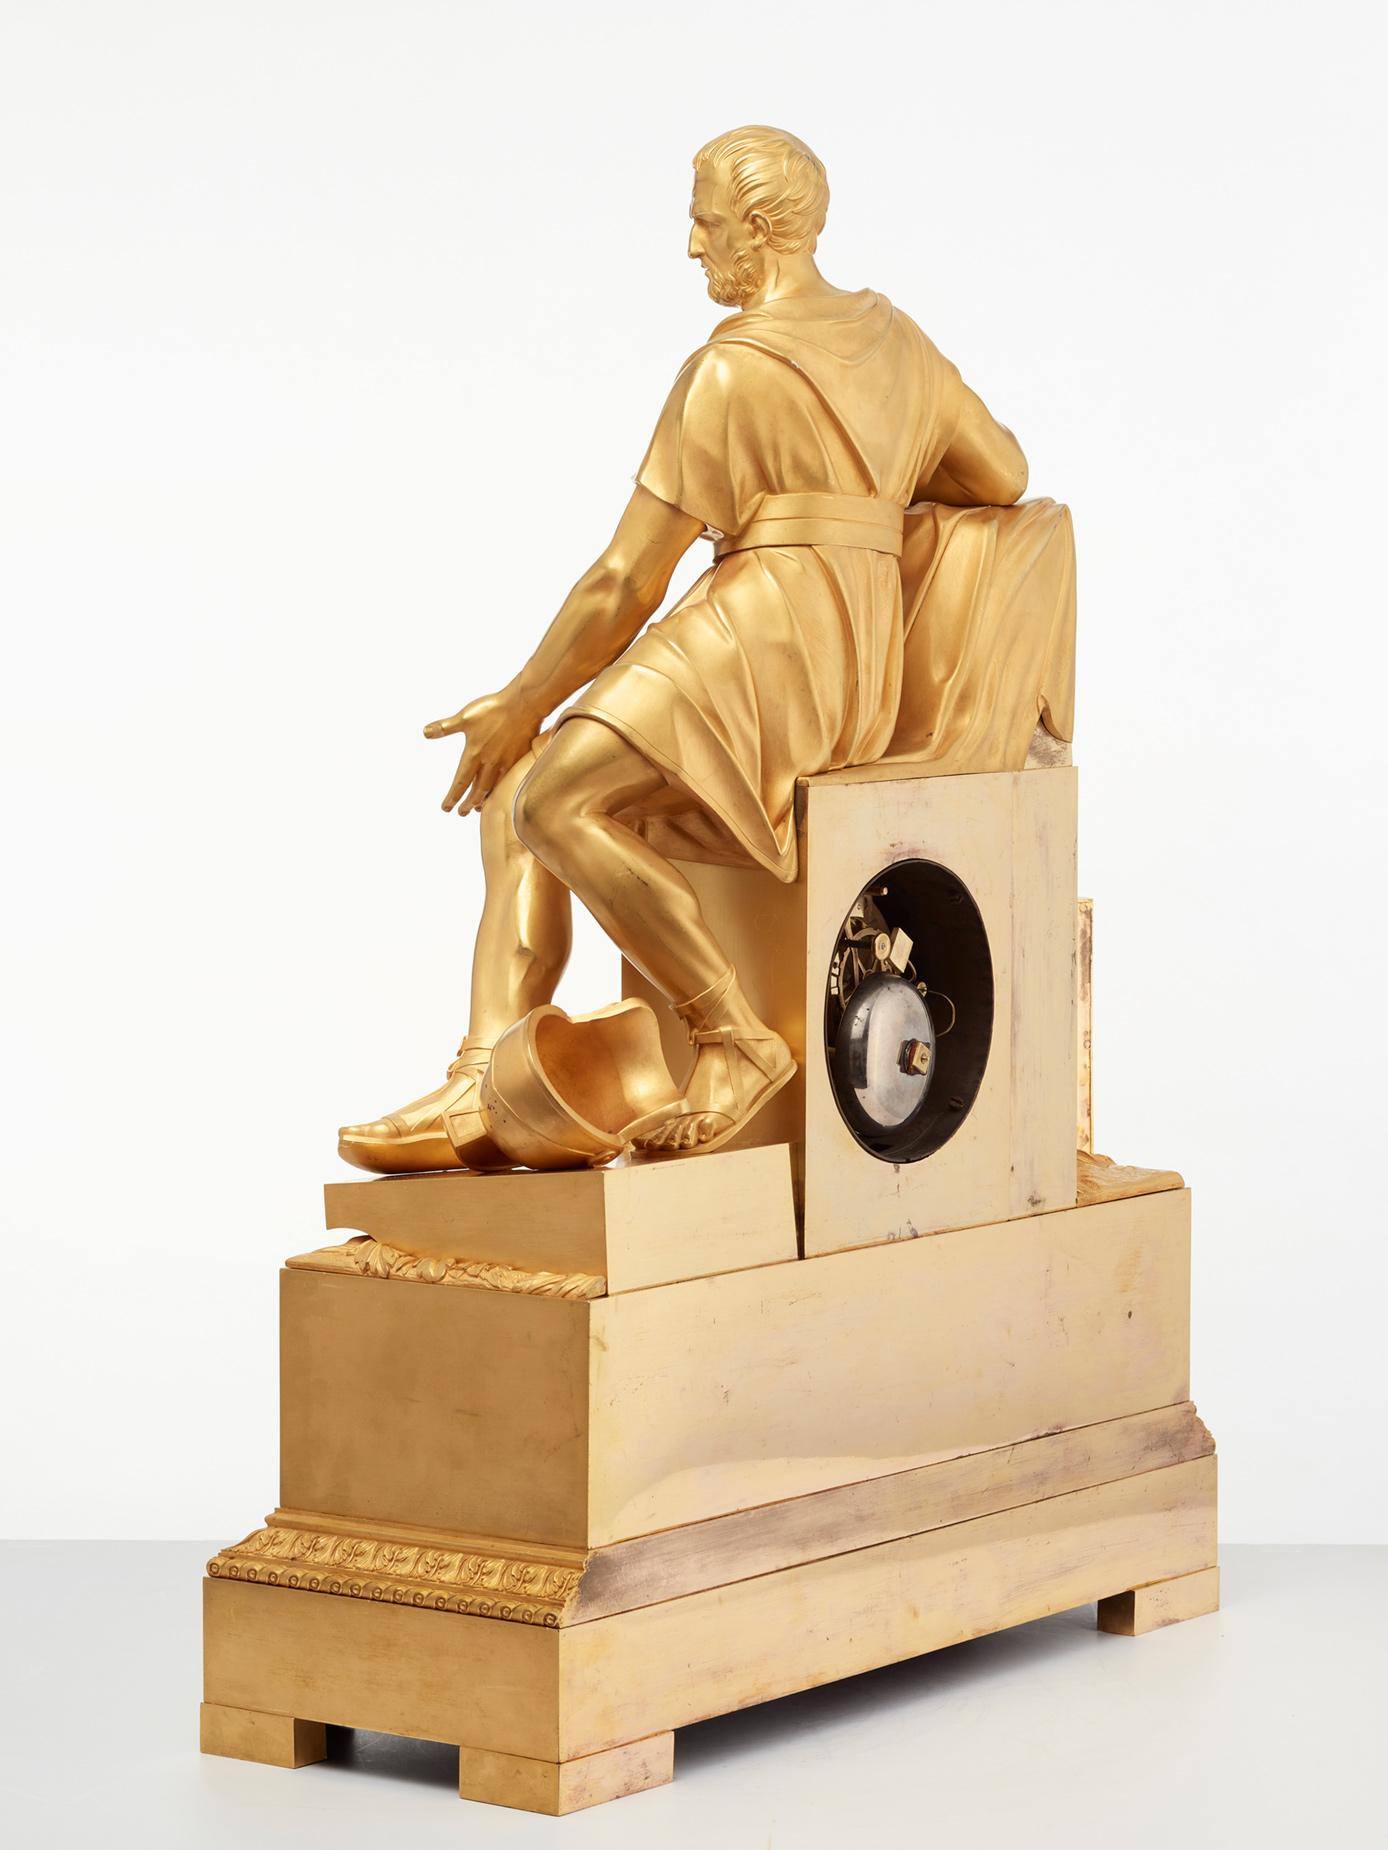 A very imposing high quality bronze cast, fire guilded Empire mantel clock, of remarkable size with high quality details.

The theme of this amazing decorative object is the philosopher Horatius sitting on the ruins of Rome, including a fallen